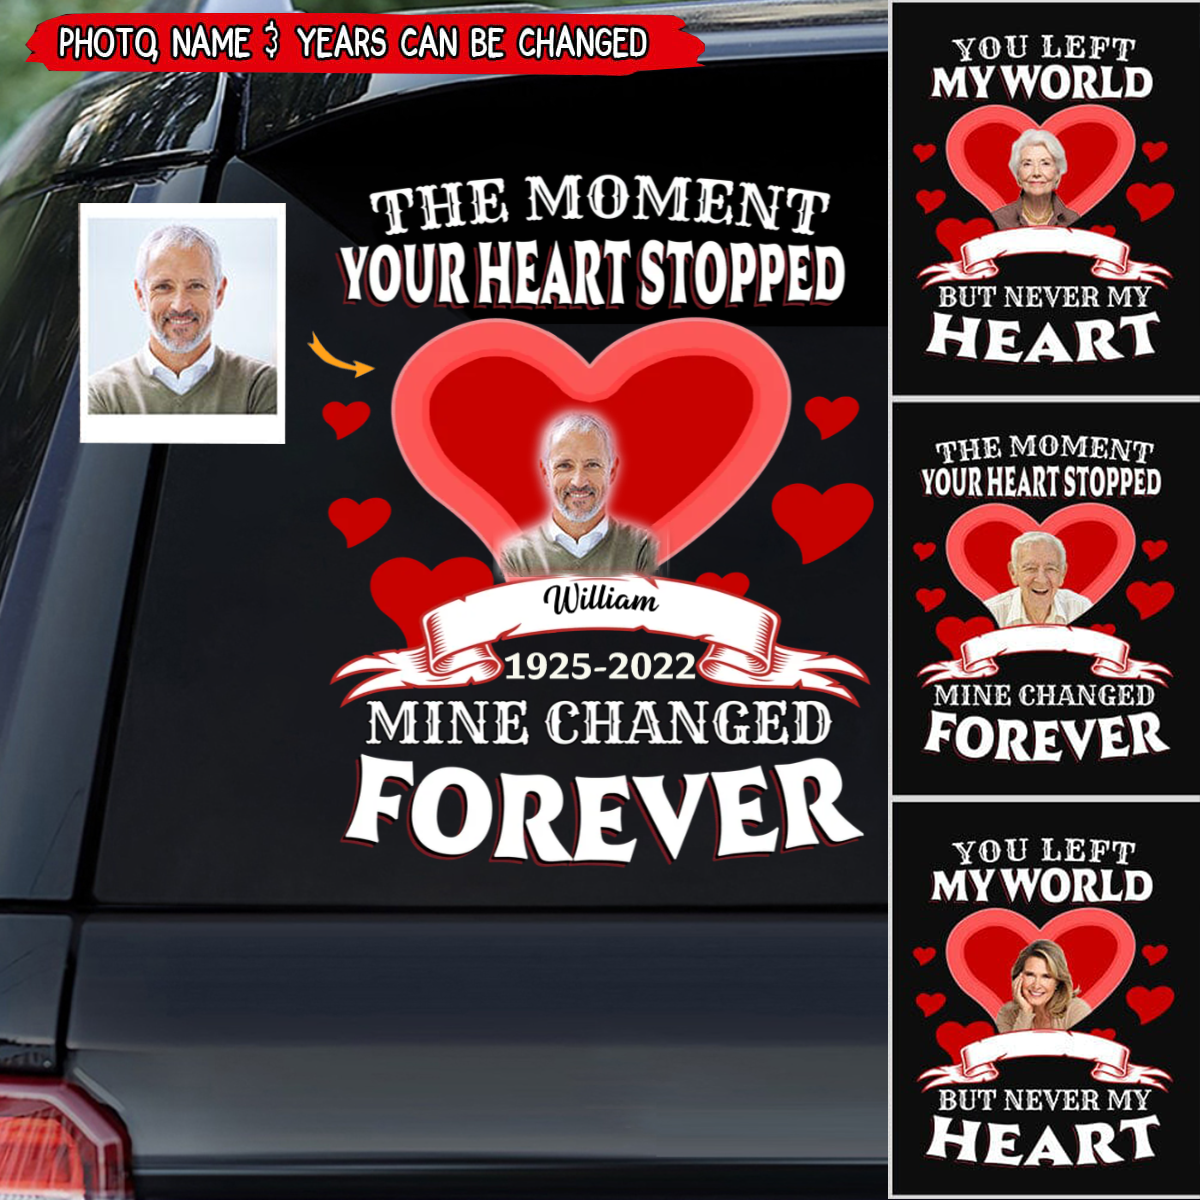 The Moment Your Heart Stopped Mine Changed Forever Custom Photo Memorial Decal